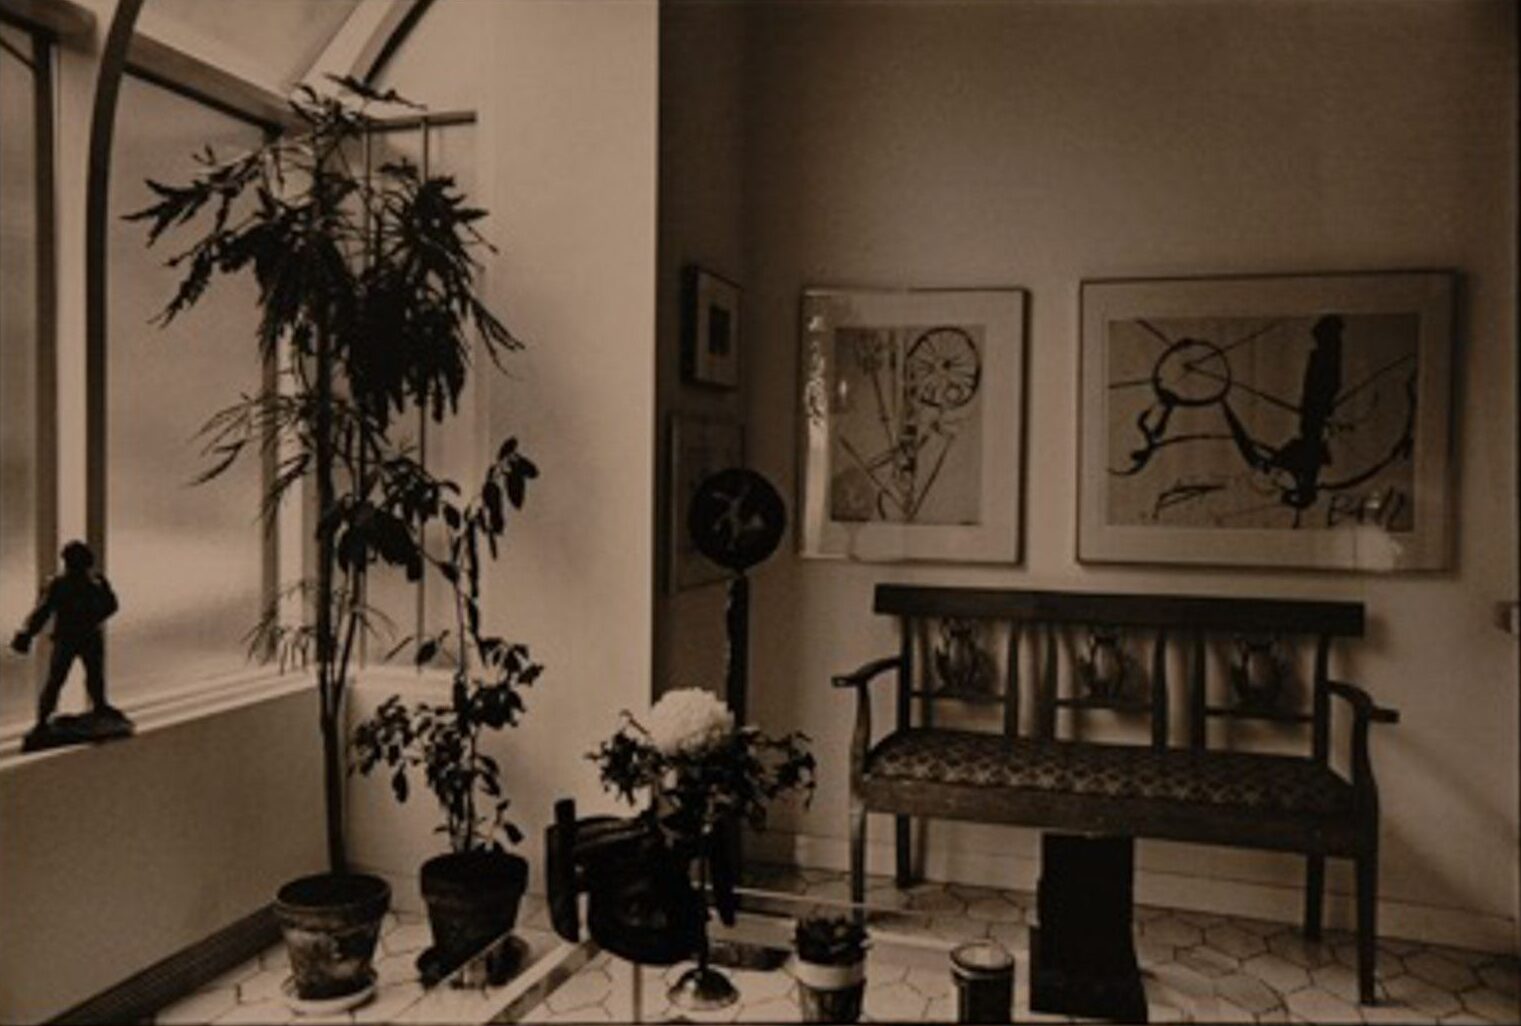 A black and white image of a home interior